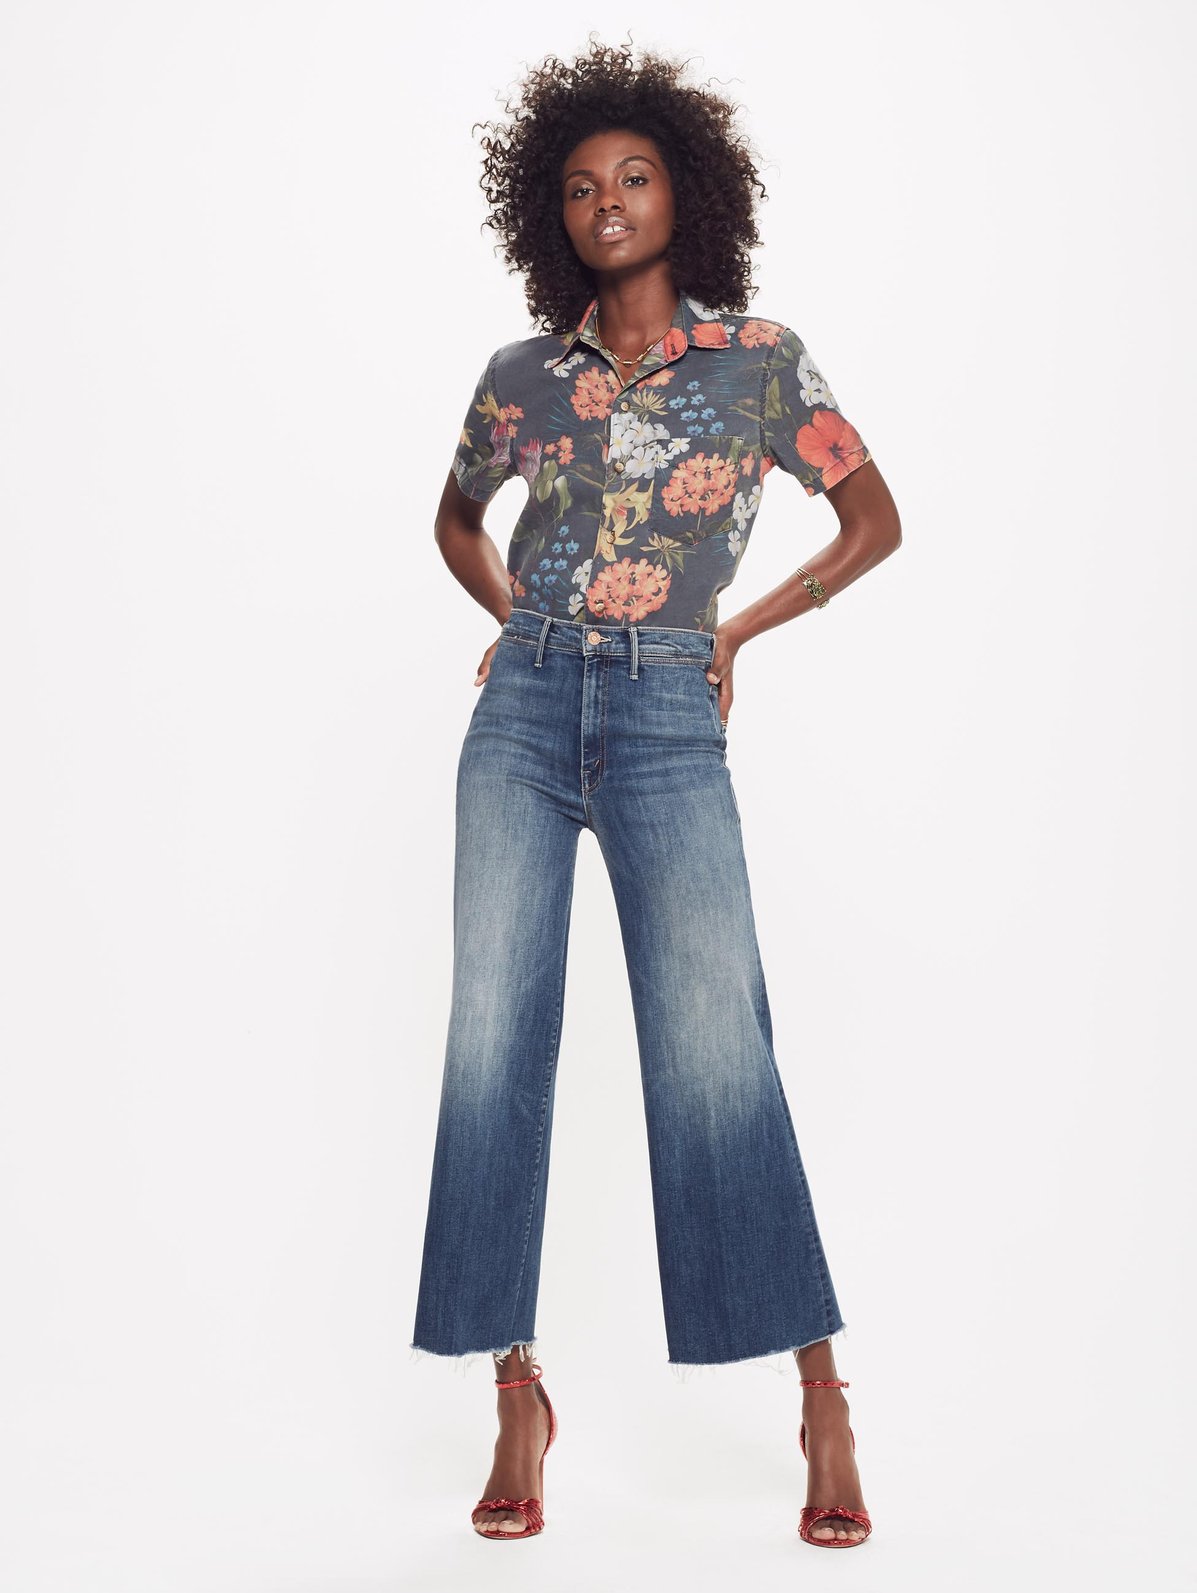 Best-Selling Denim Trends of Summer 2018 | Who